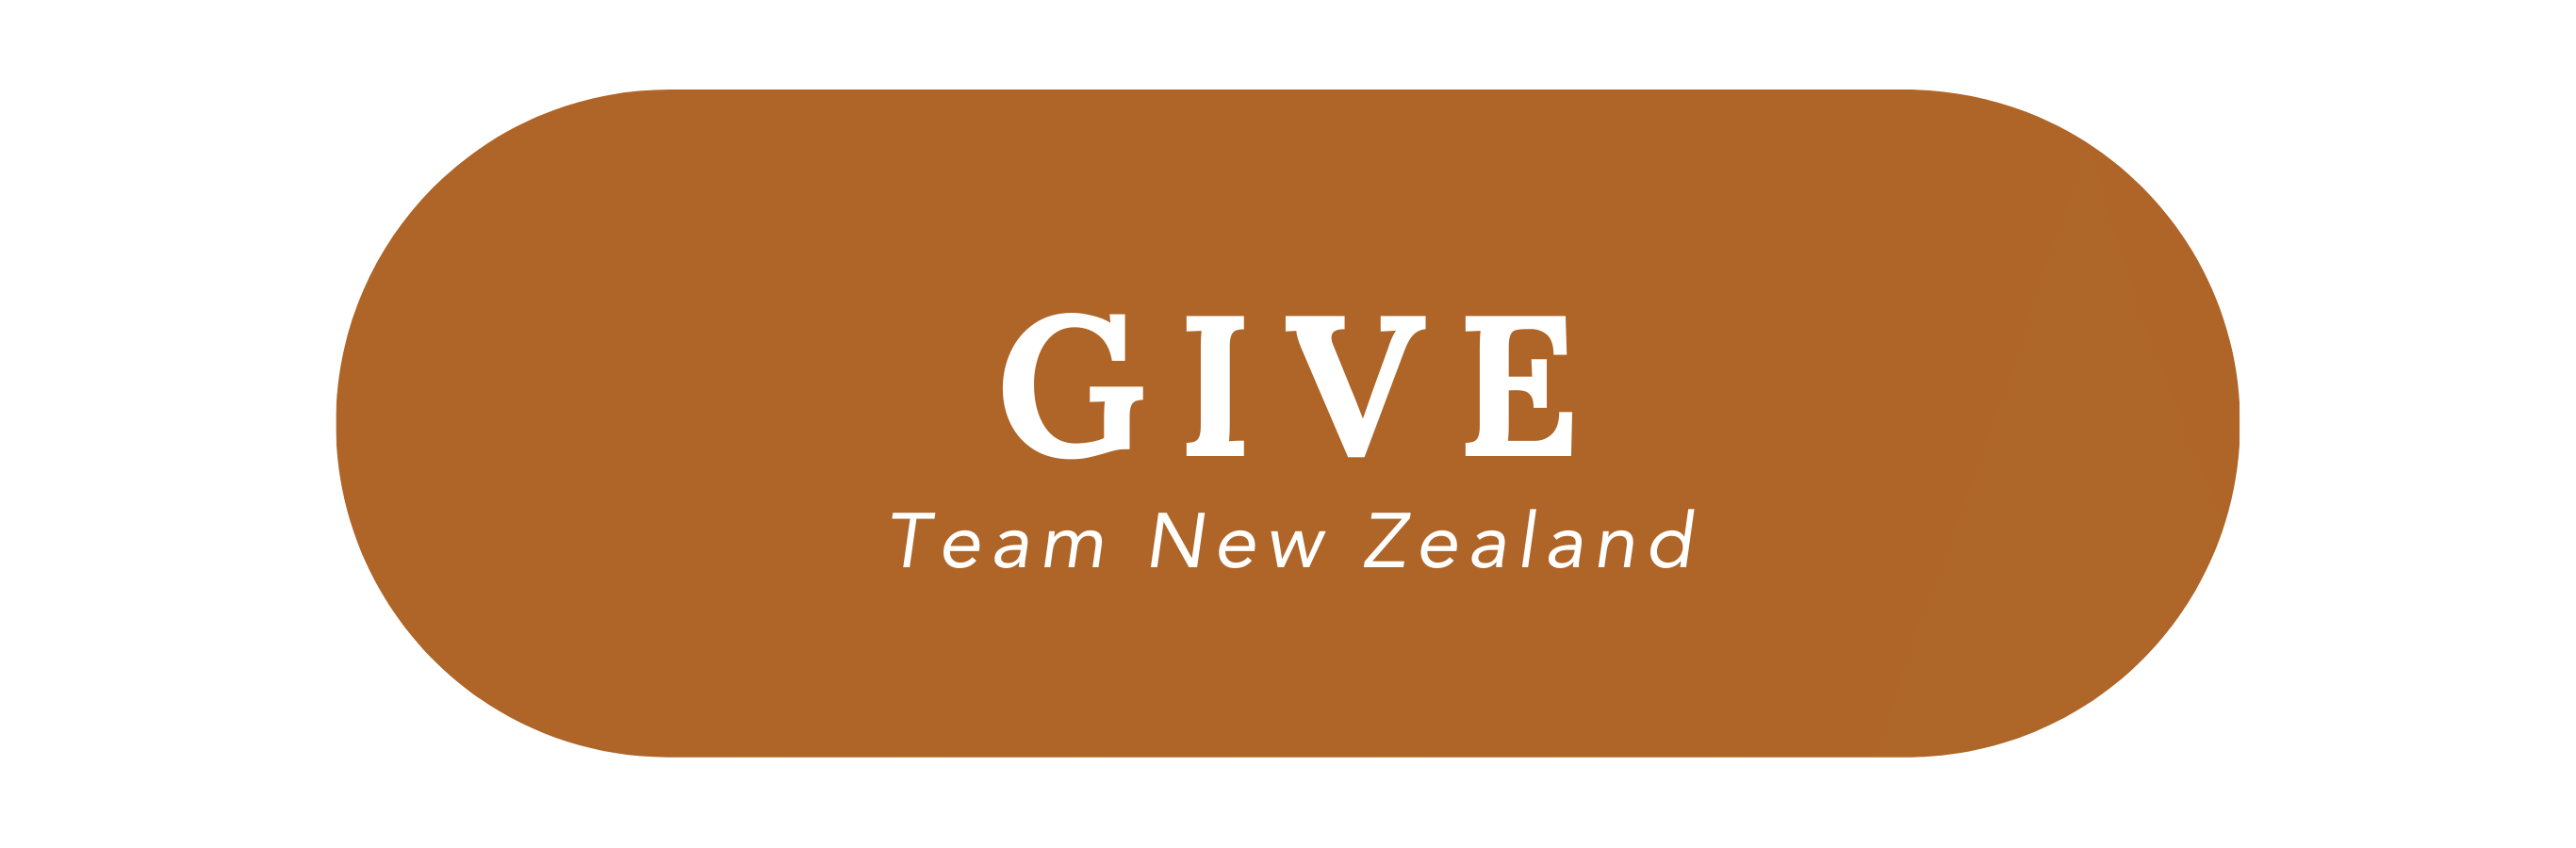 240711 Team New Zealand - Give Button